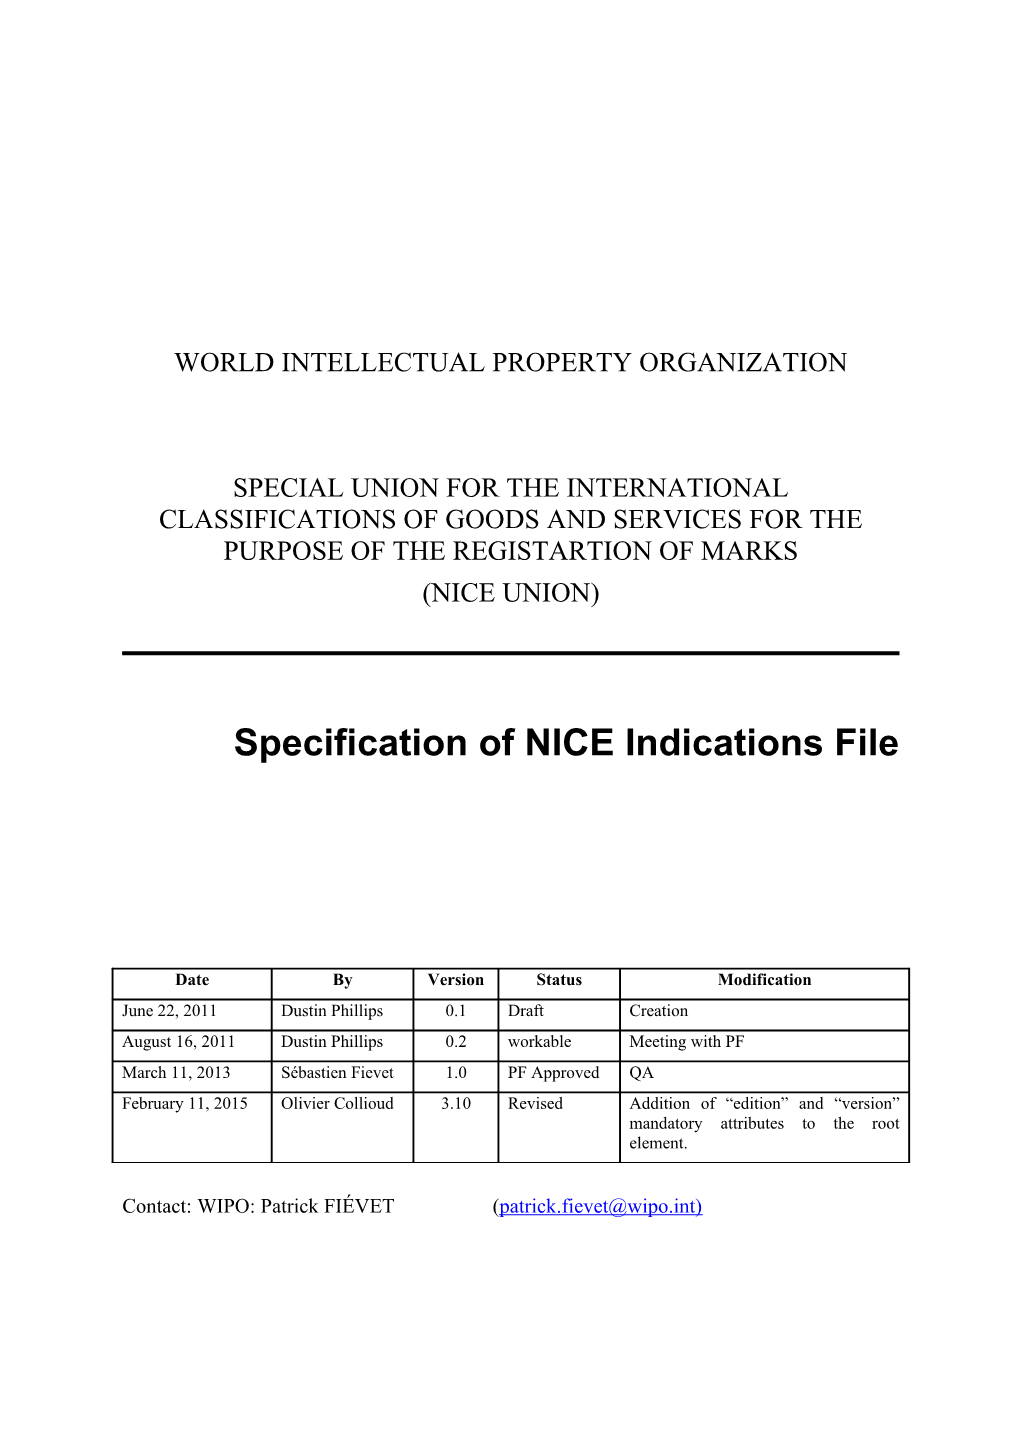 Specification of NICE Indications File